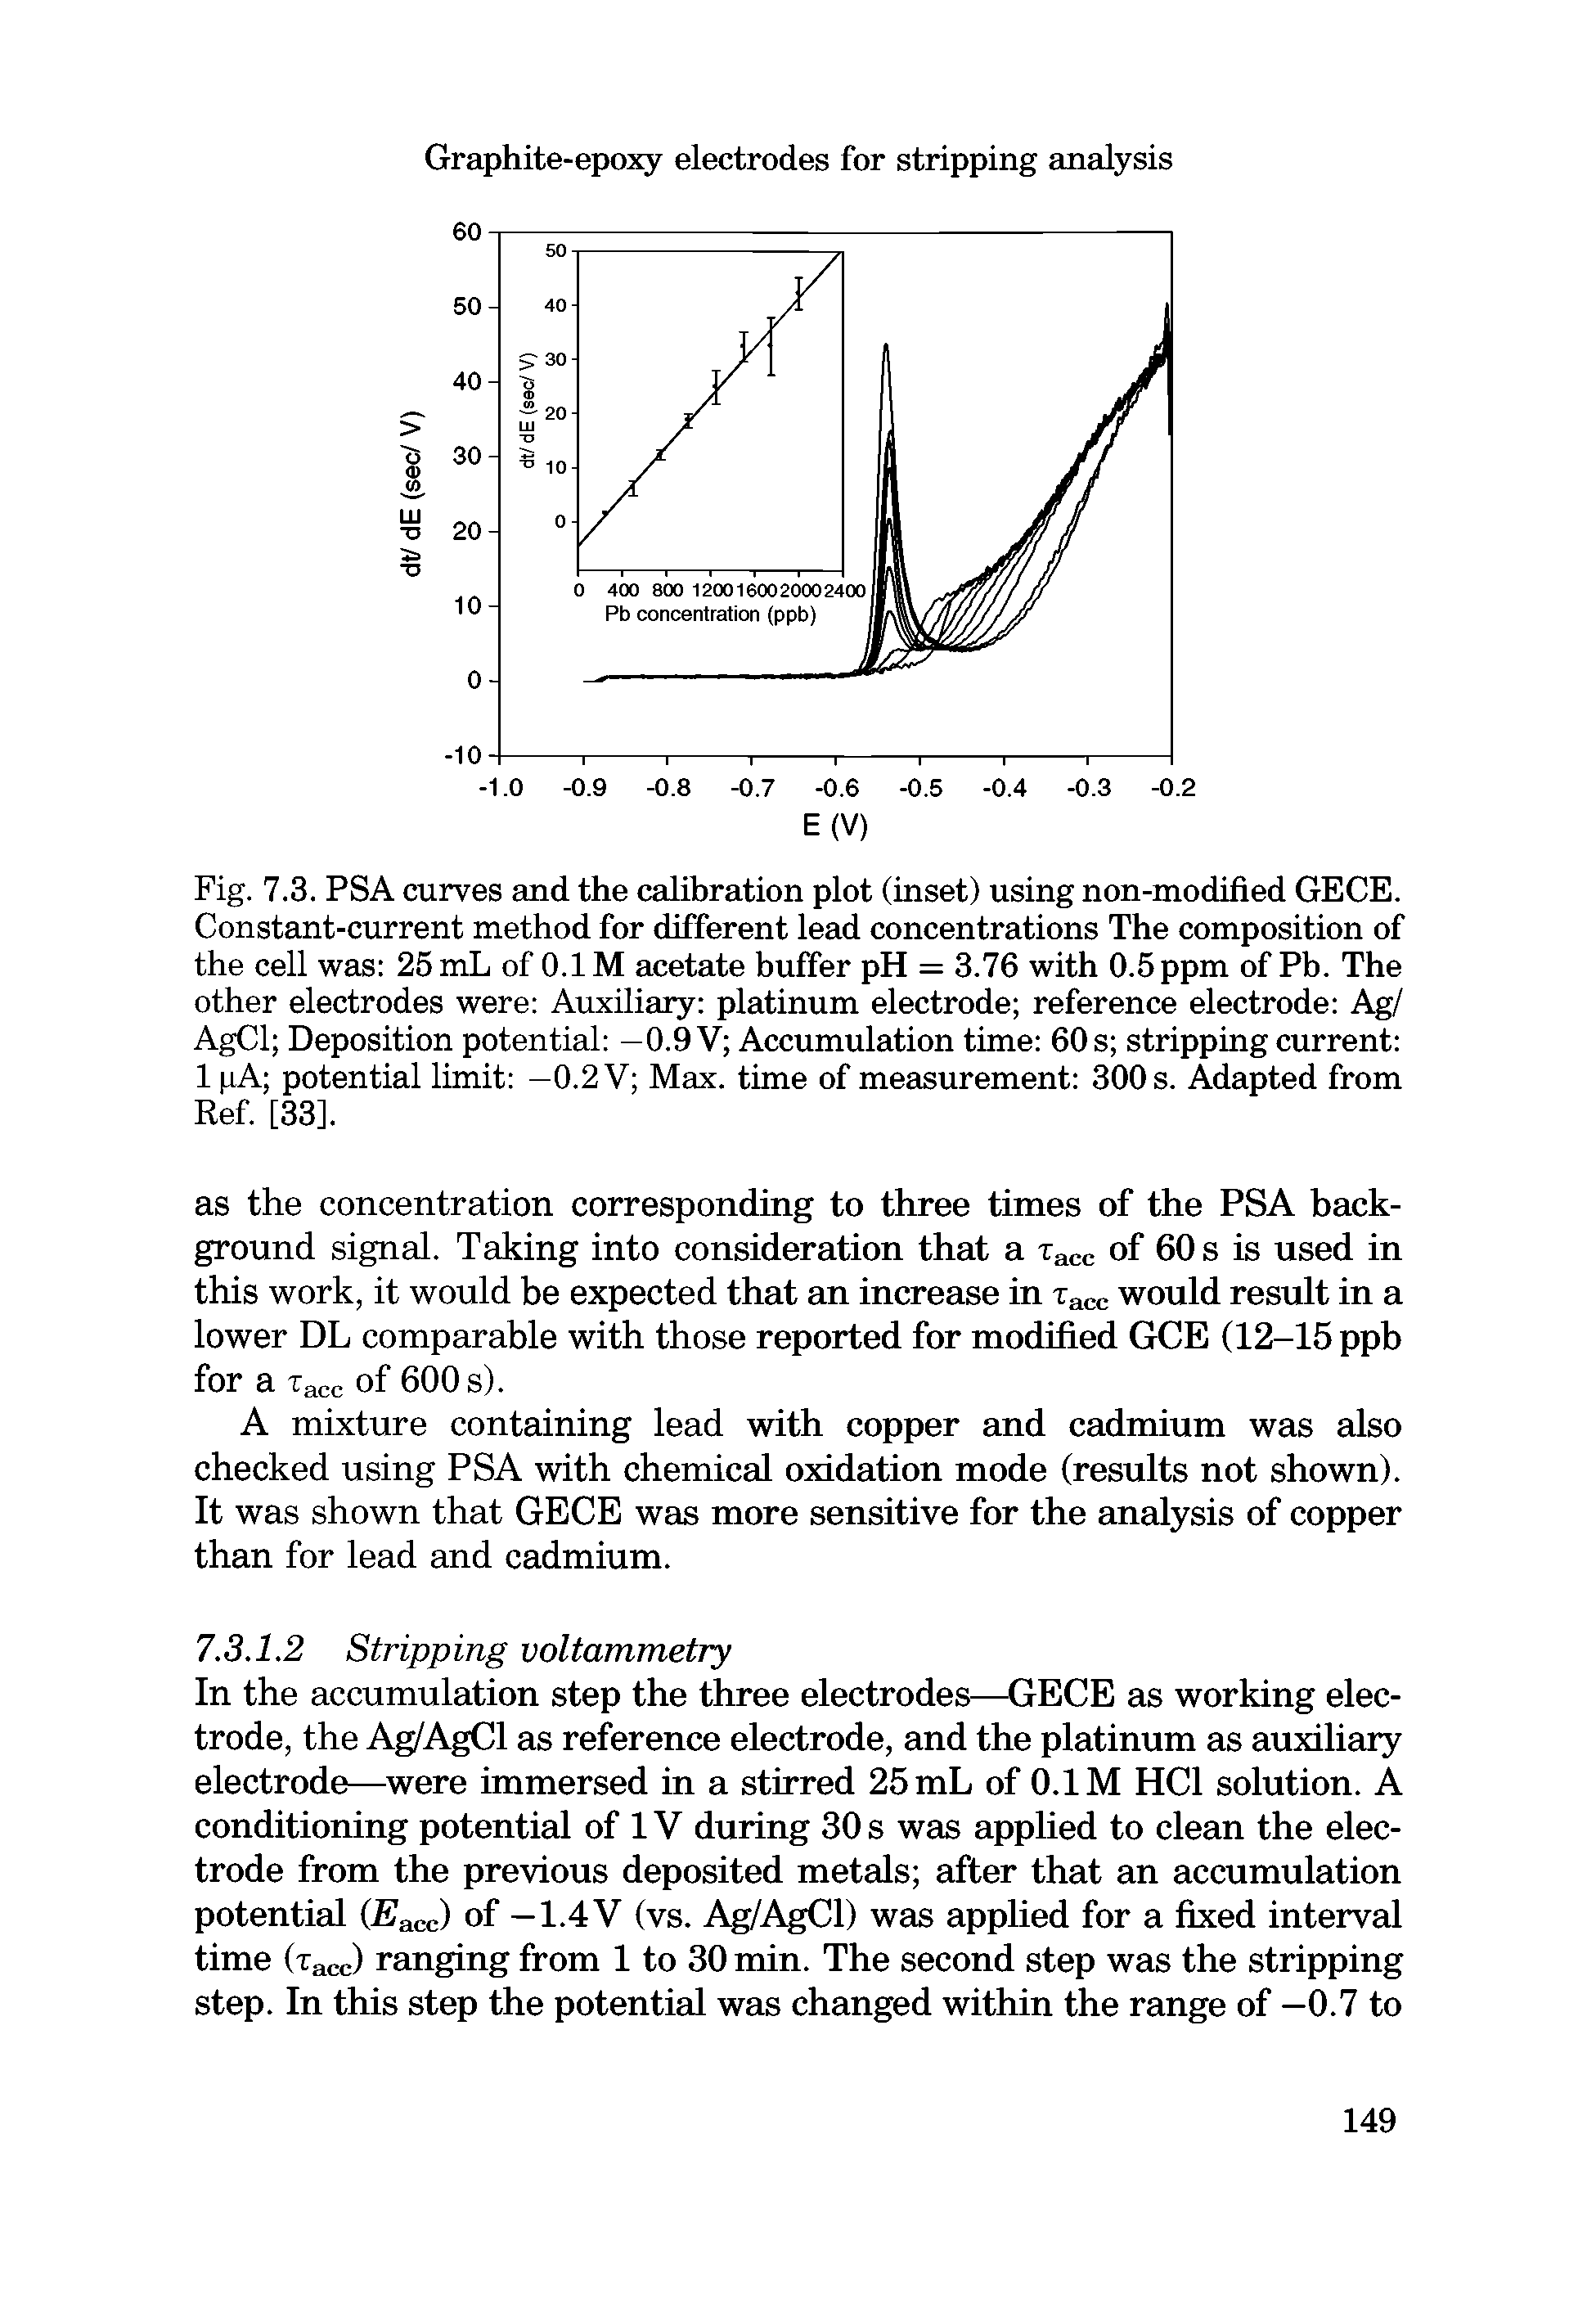 Fig. 7.3. PSA curves and the calibration plot (inset) using non-modified GECE. Constant-current method for different lead concentrations The composition of the cell was 25 mL of 0.1 M acetate buffer pH = 3.76 with 0.5 ppm of Pb. The other electrodes were Auxiliary platinum electrode reference electrode Ag/ AgCl Deposition potential —0.9 V Accumulation time 60 s stripping current 1 pA potential limit —0.2 V Max. time of measurement 300 s. Adapted from Ref. [33].